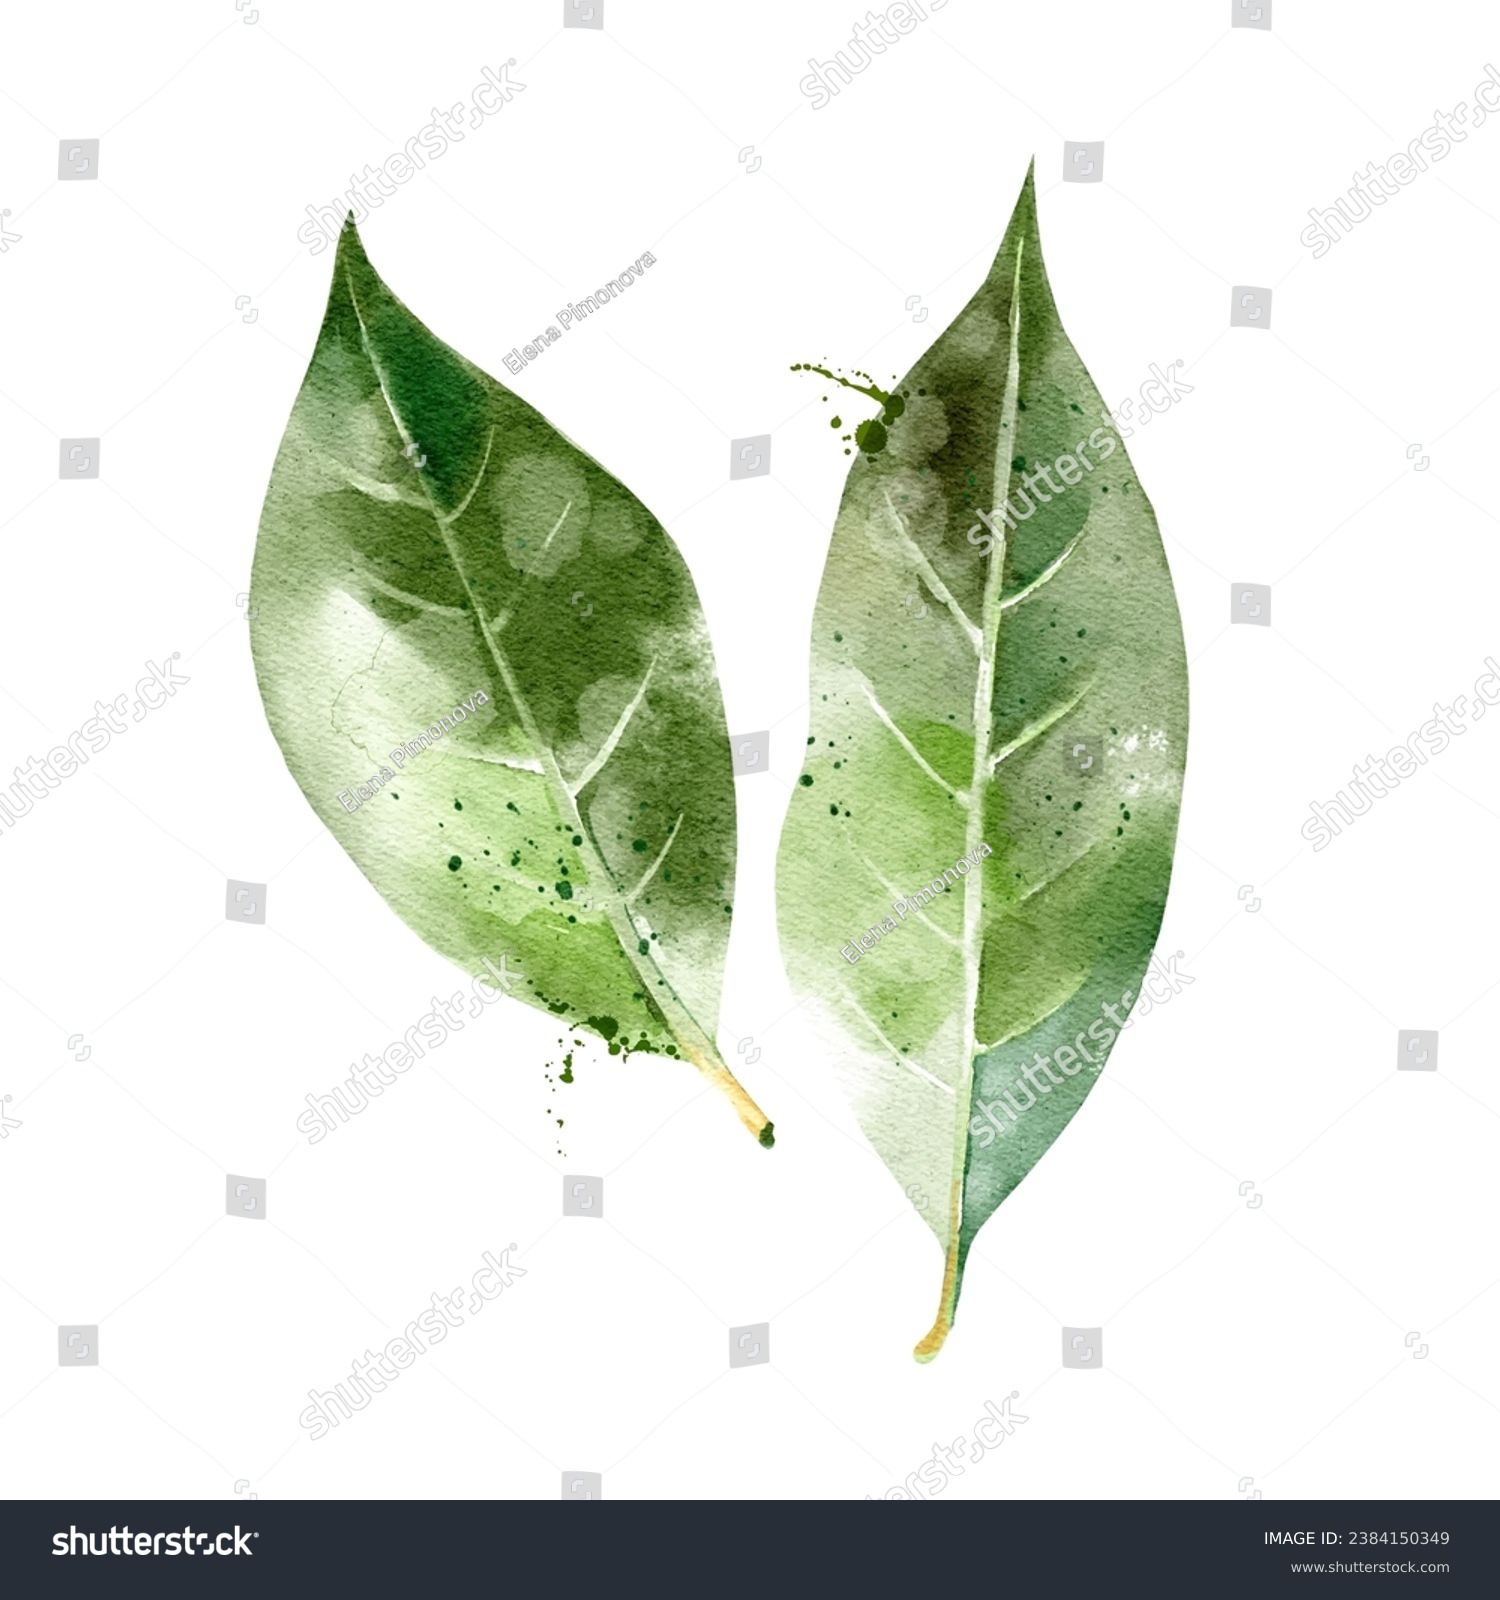 SVG of Watercolor hand drawn sketch ingredient bay leaves. Painted vector isolated illustration on white background for packaging design svg